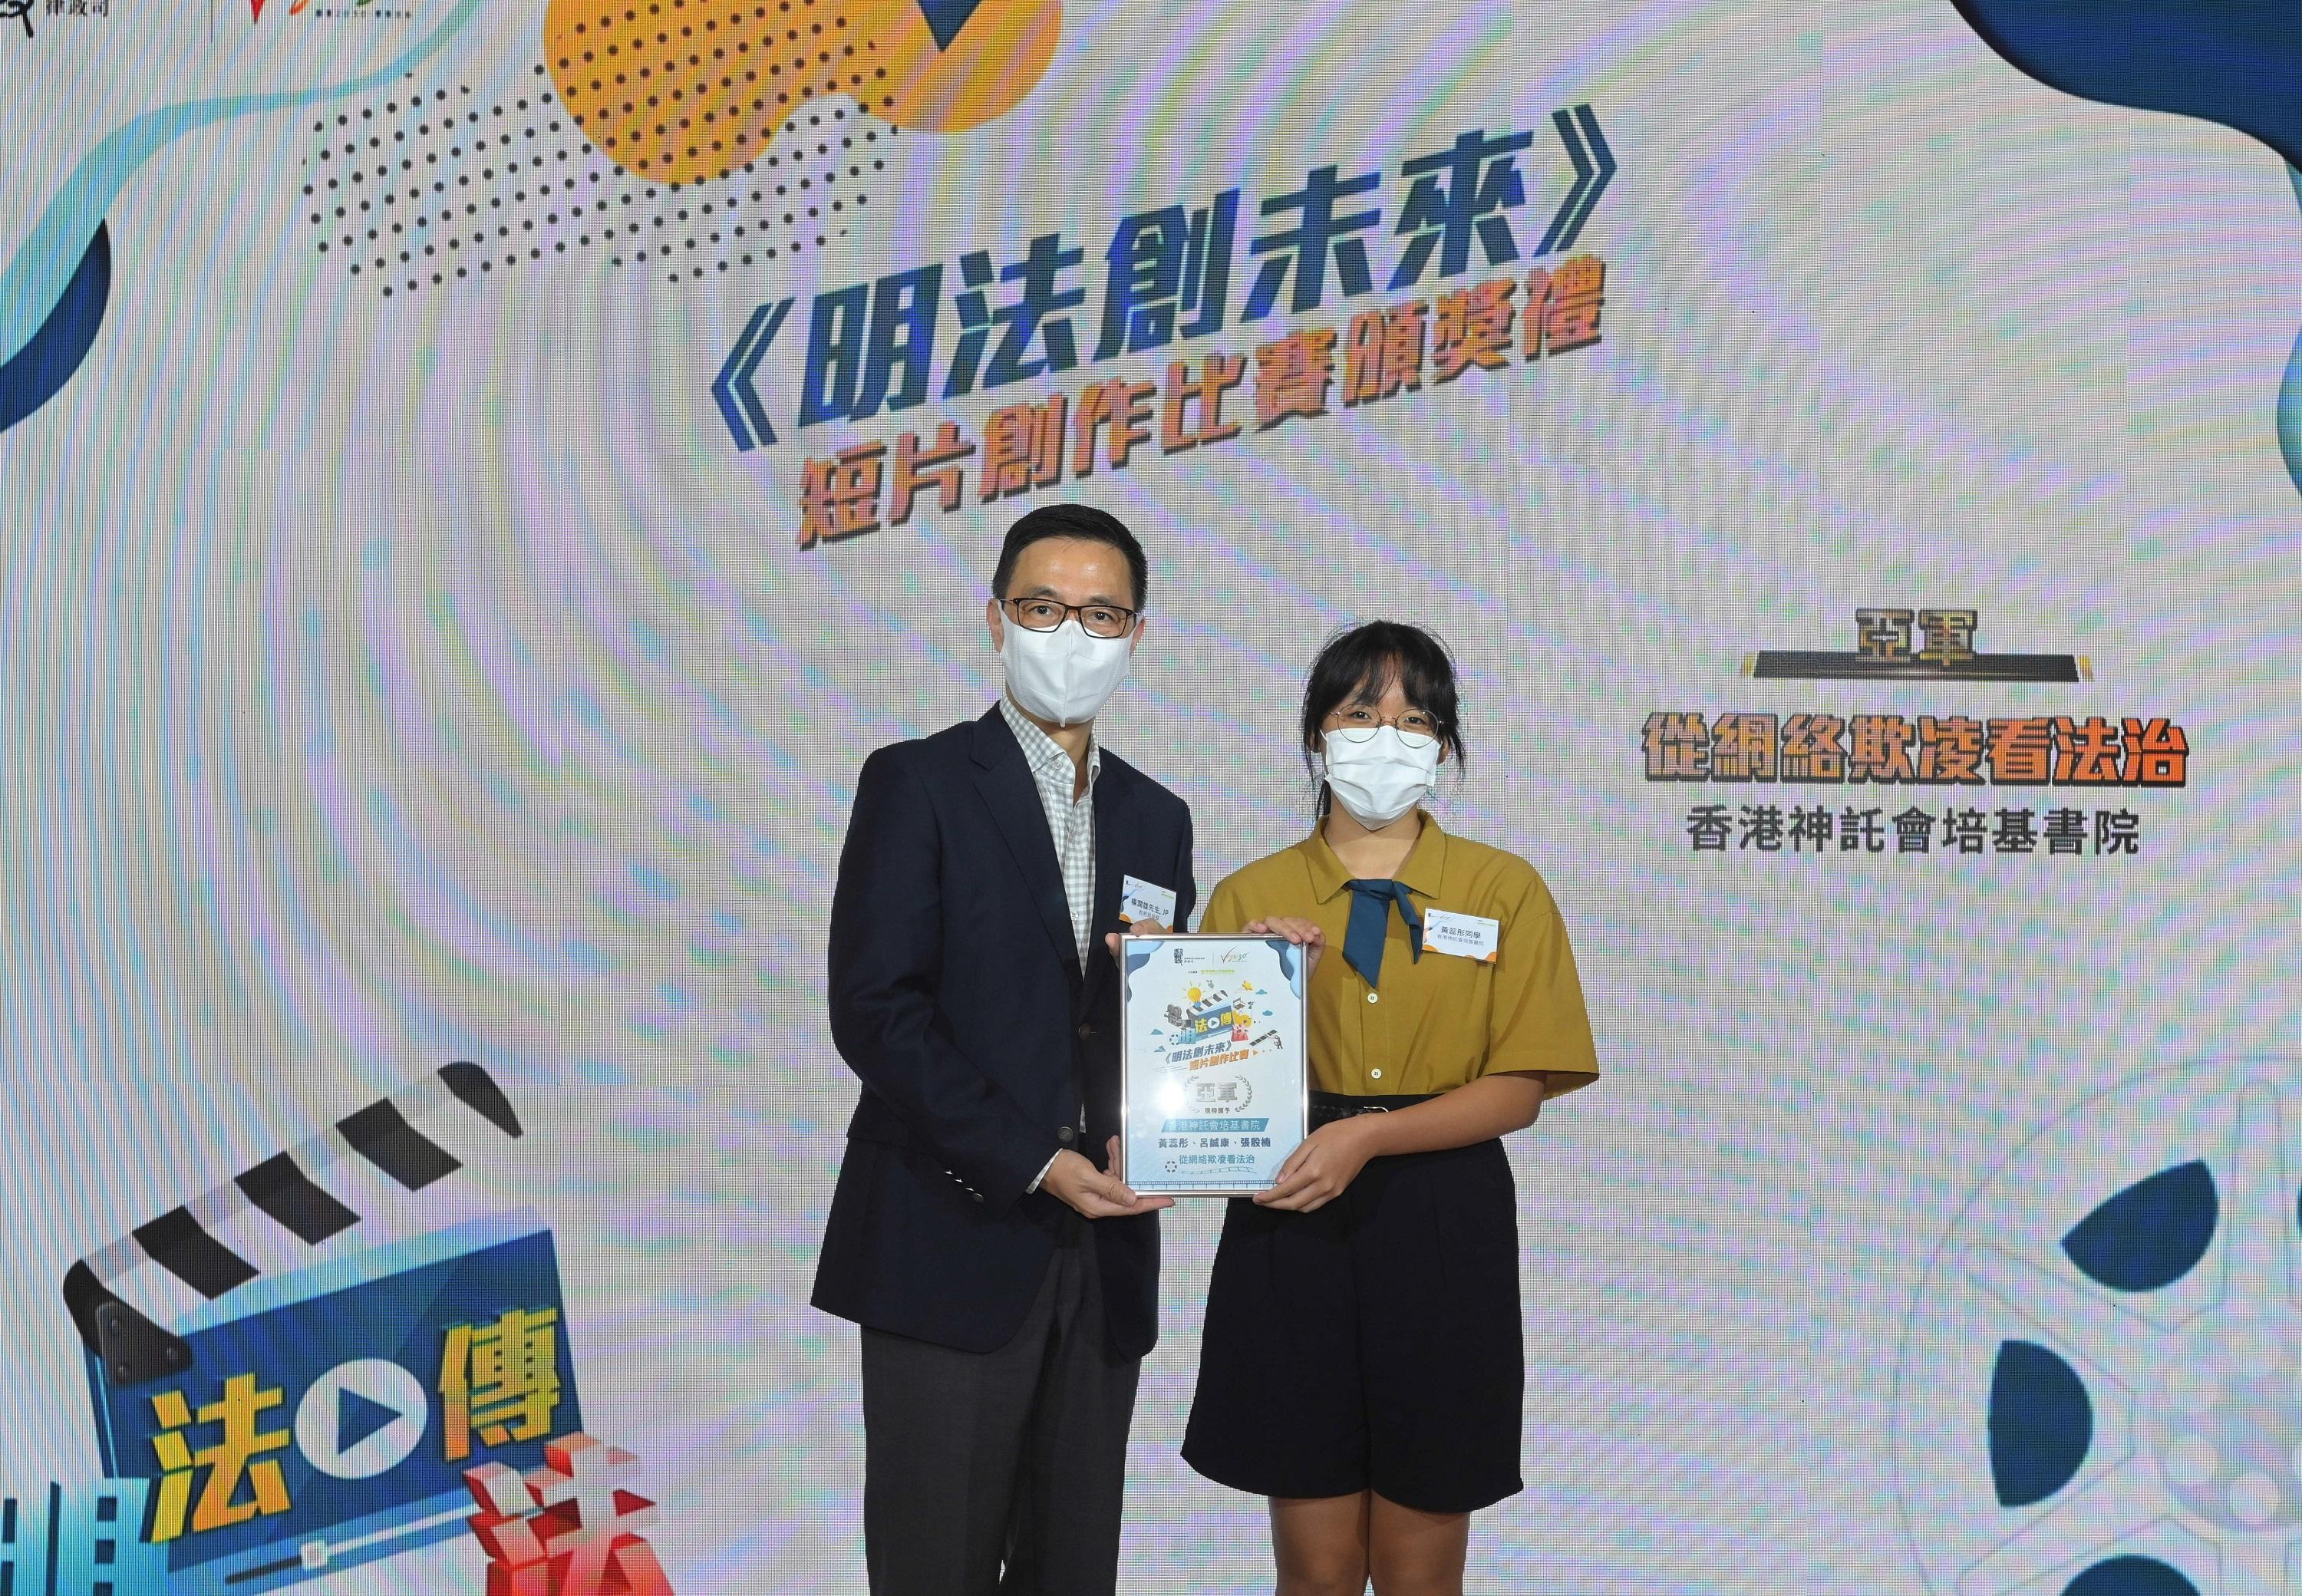 The "Key to the Future" Short Video Competition Award Presentation Ceremony organised by the Department of Justice was held today (May 7). Picture shows the Secretary for Education, Mr Kevin Yeung, presenting award to the first runner-up.